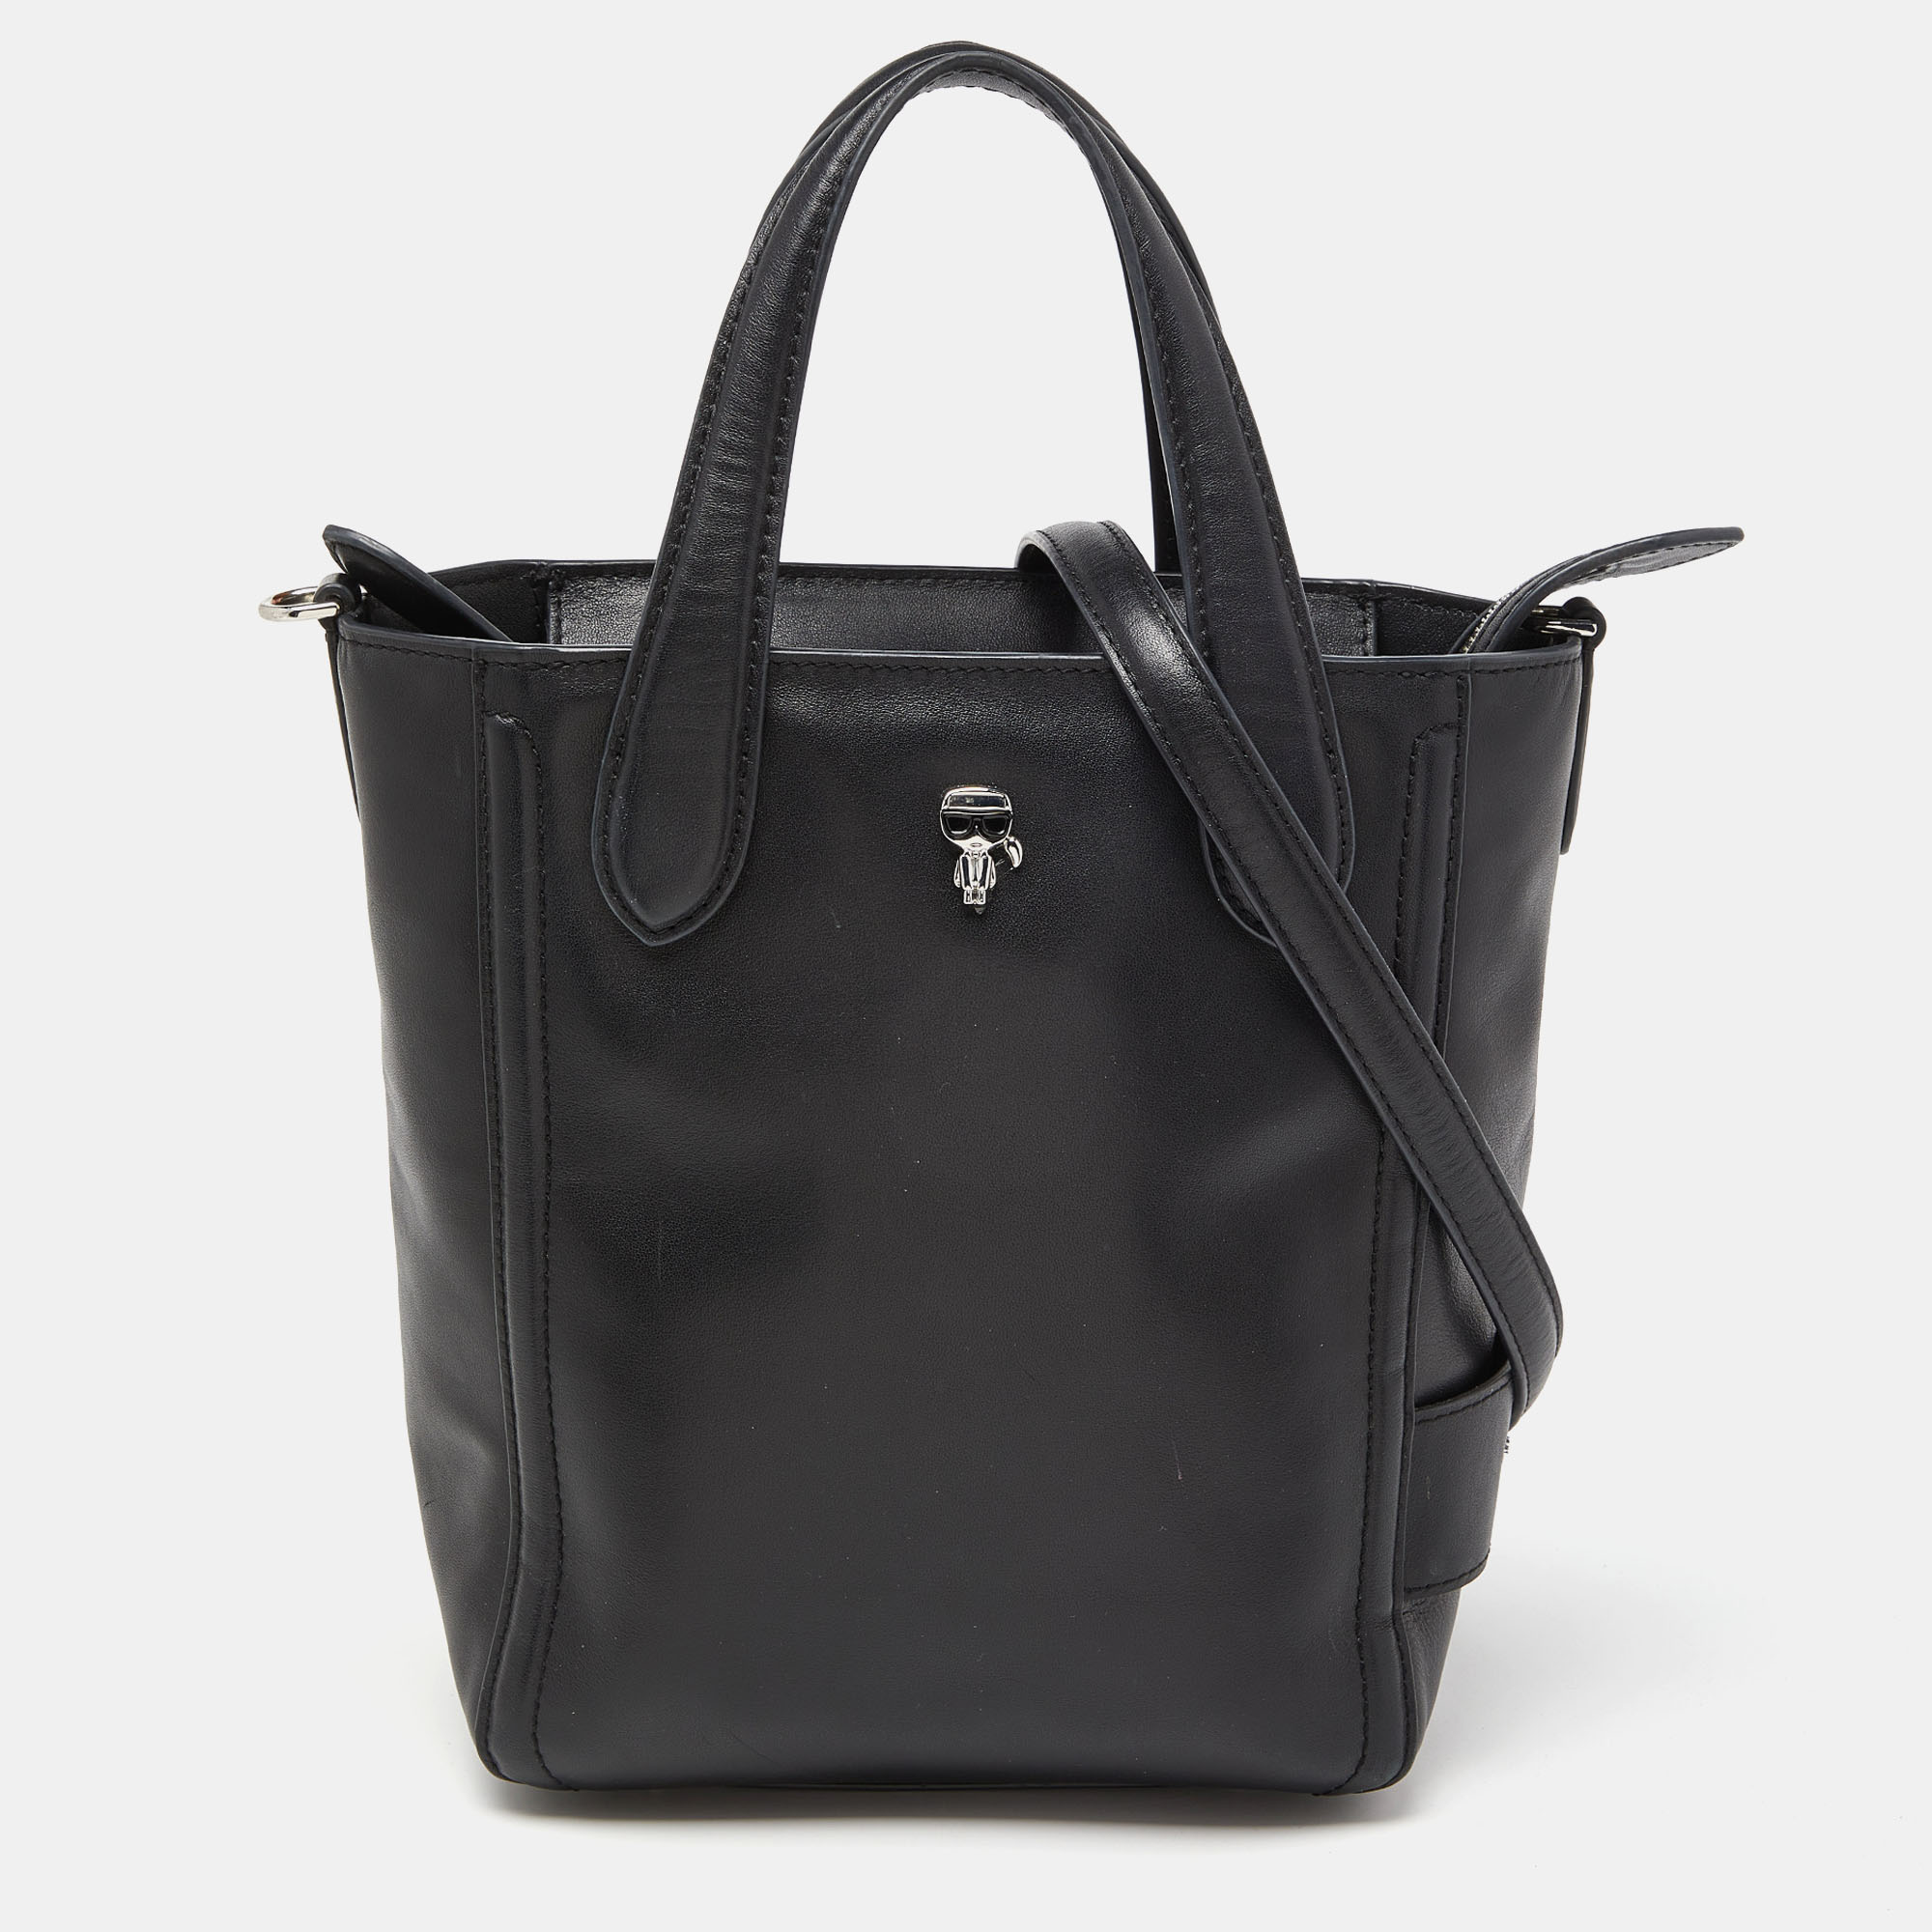 Pre-owned Karl Lagerfeld Black Leather Tote